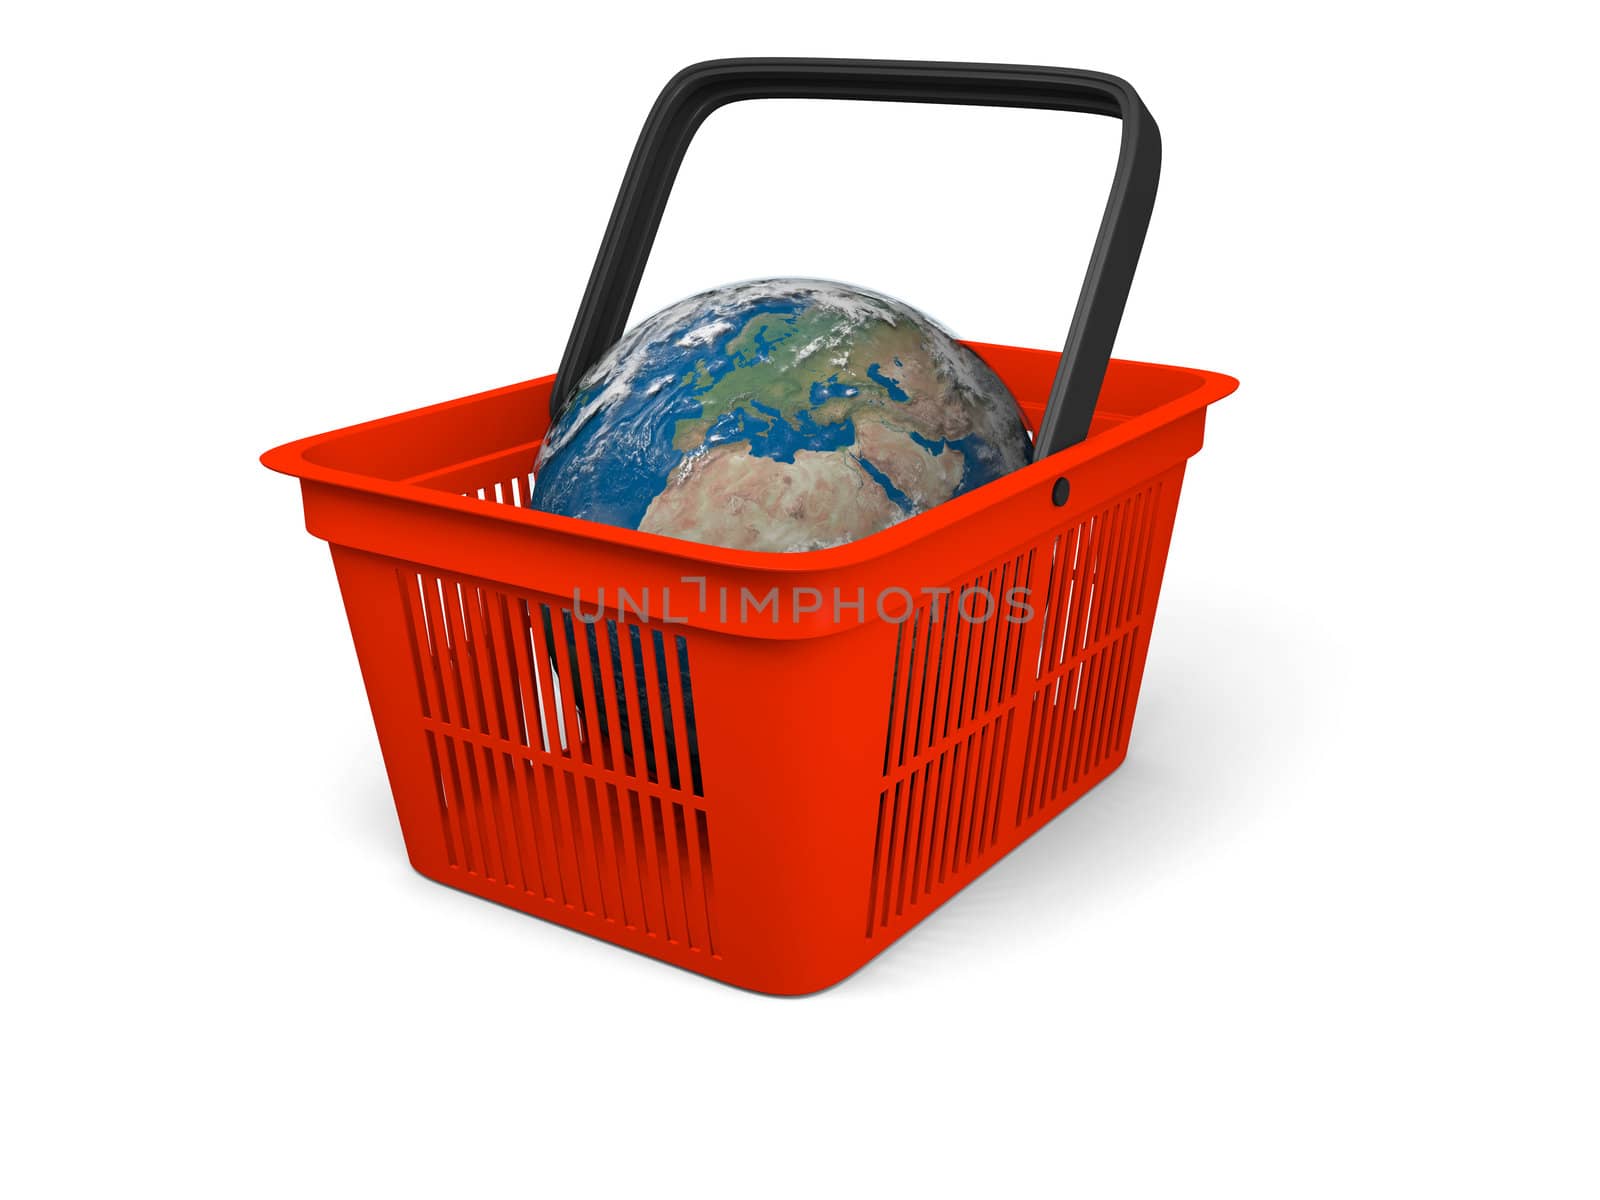 Earth in shopping basket by Harvepino